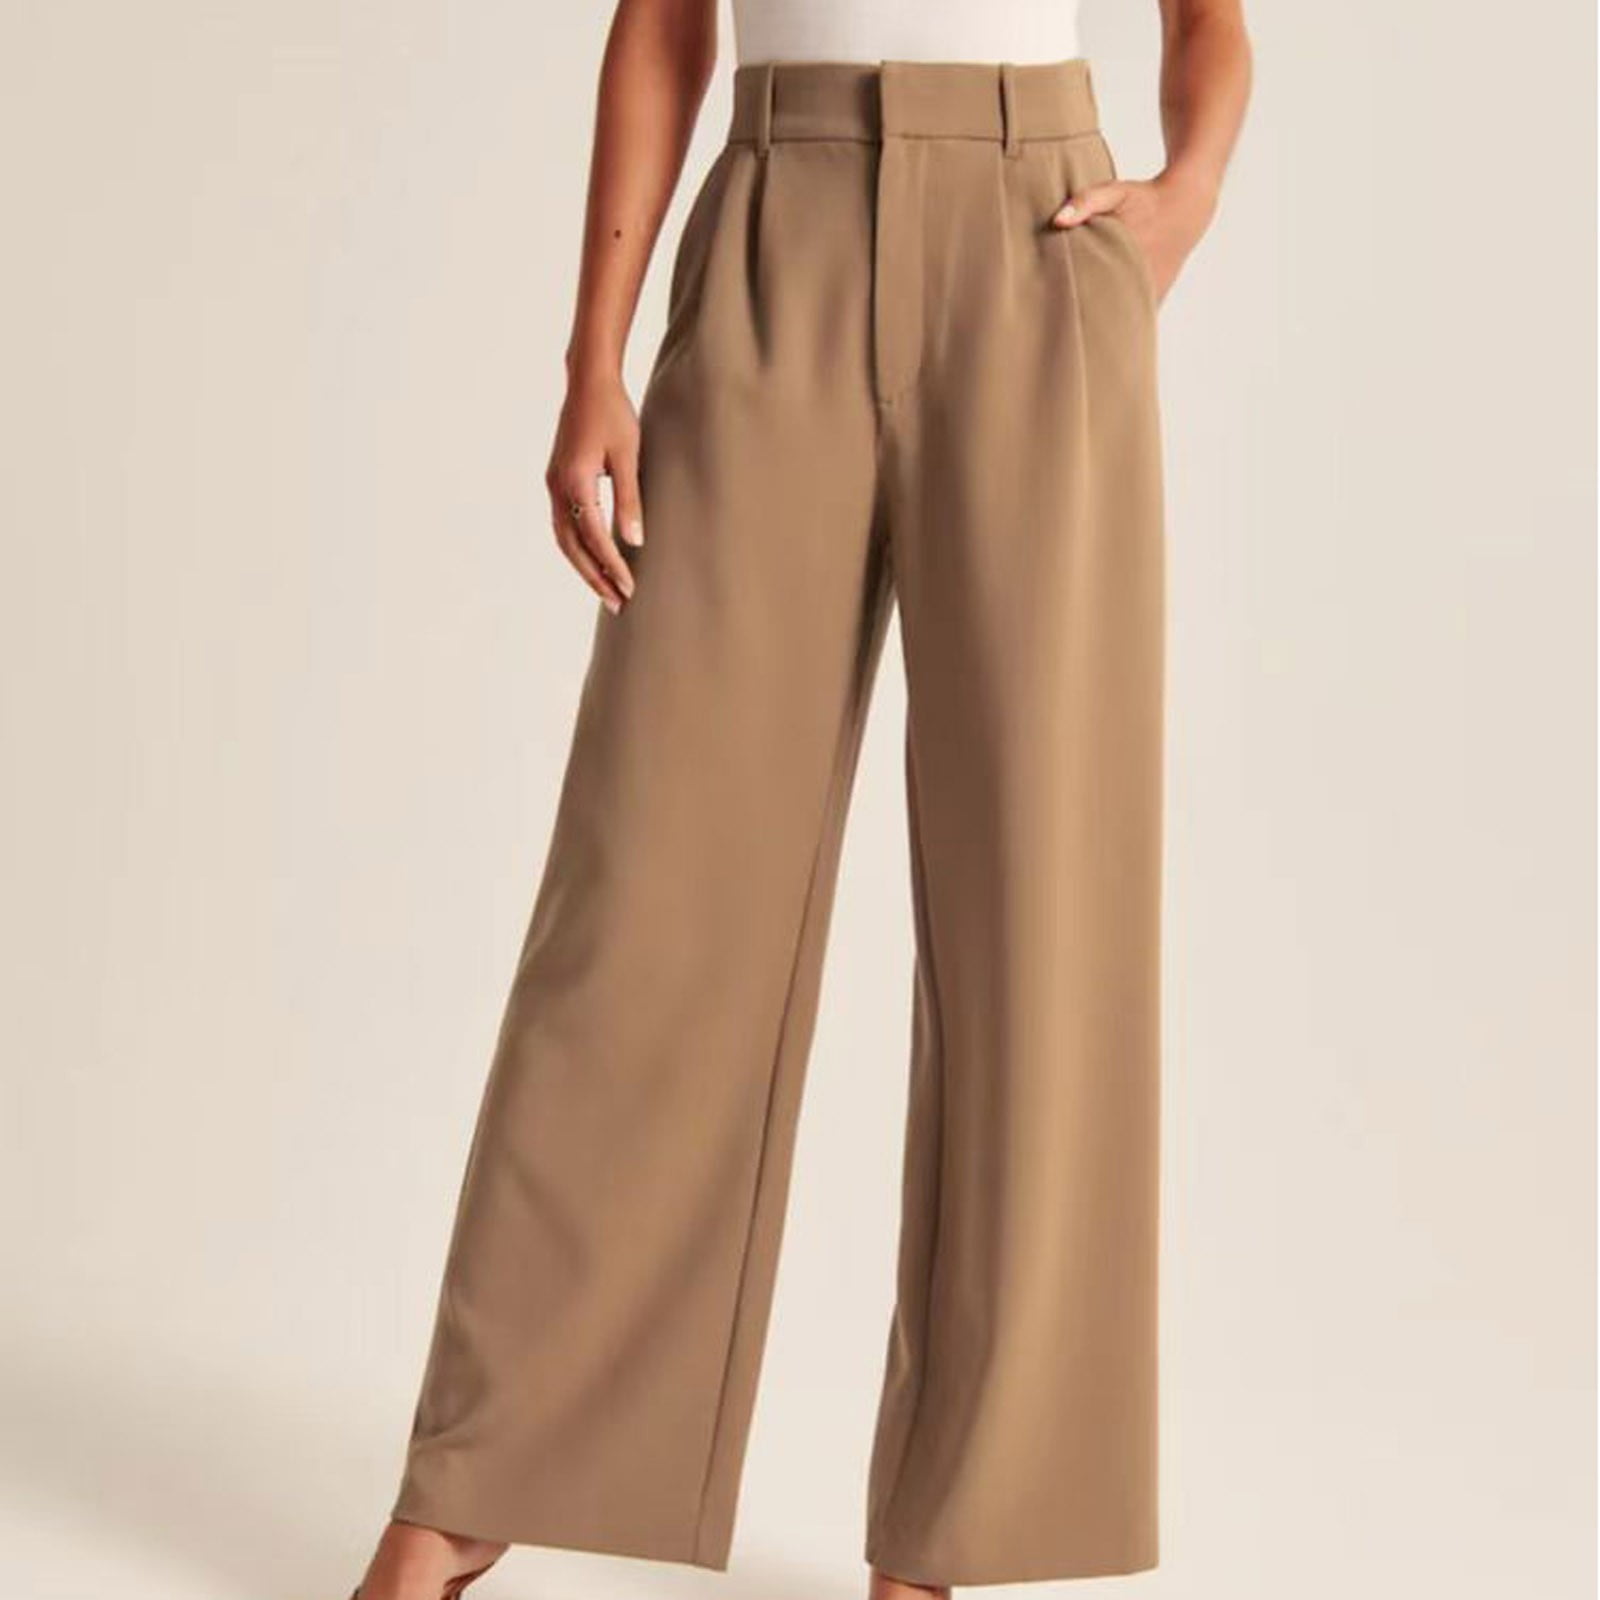 Reduce Price RYRJJ Wide Leg Pants for Women Work Business Casual High  Waisted Dress Pants Comfy Flowy Trousers Office(Khaki,S)